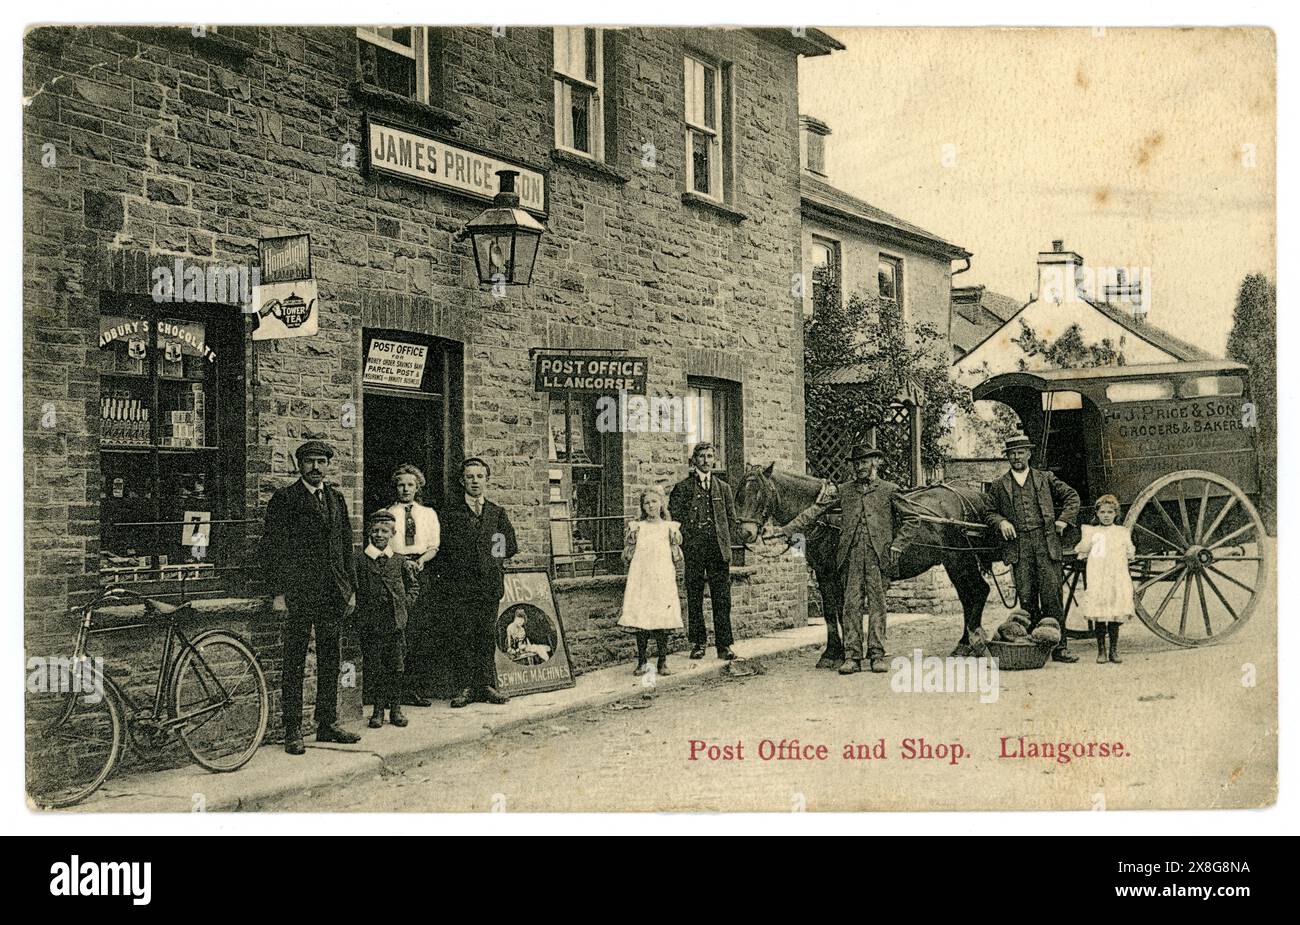 Original early 1900's postcard of Llangorse post office and shop, James Price owned this shop as well as the bakers and grocers  delivery cart, and the photograph itself was by James Price & Son, From the village of Llangorse, Powys, near Brecon, Wales, U.K. Victorian shop /  Edwardian Shop. Victorian post office.The photo is dated from around 1910 by the fashions, but posted 4 Aug 1915 Stock Photo